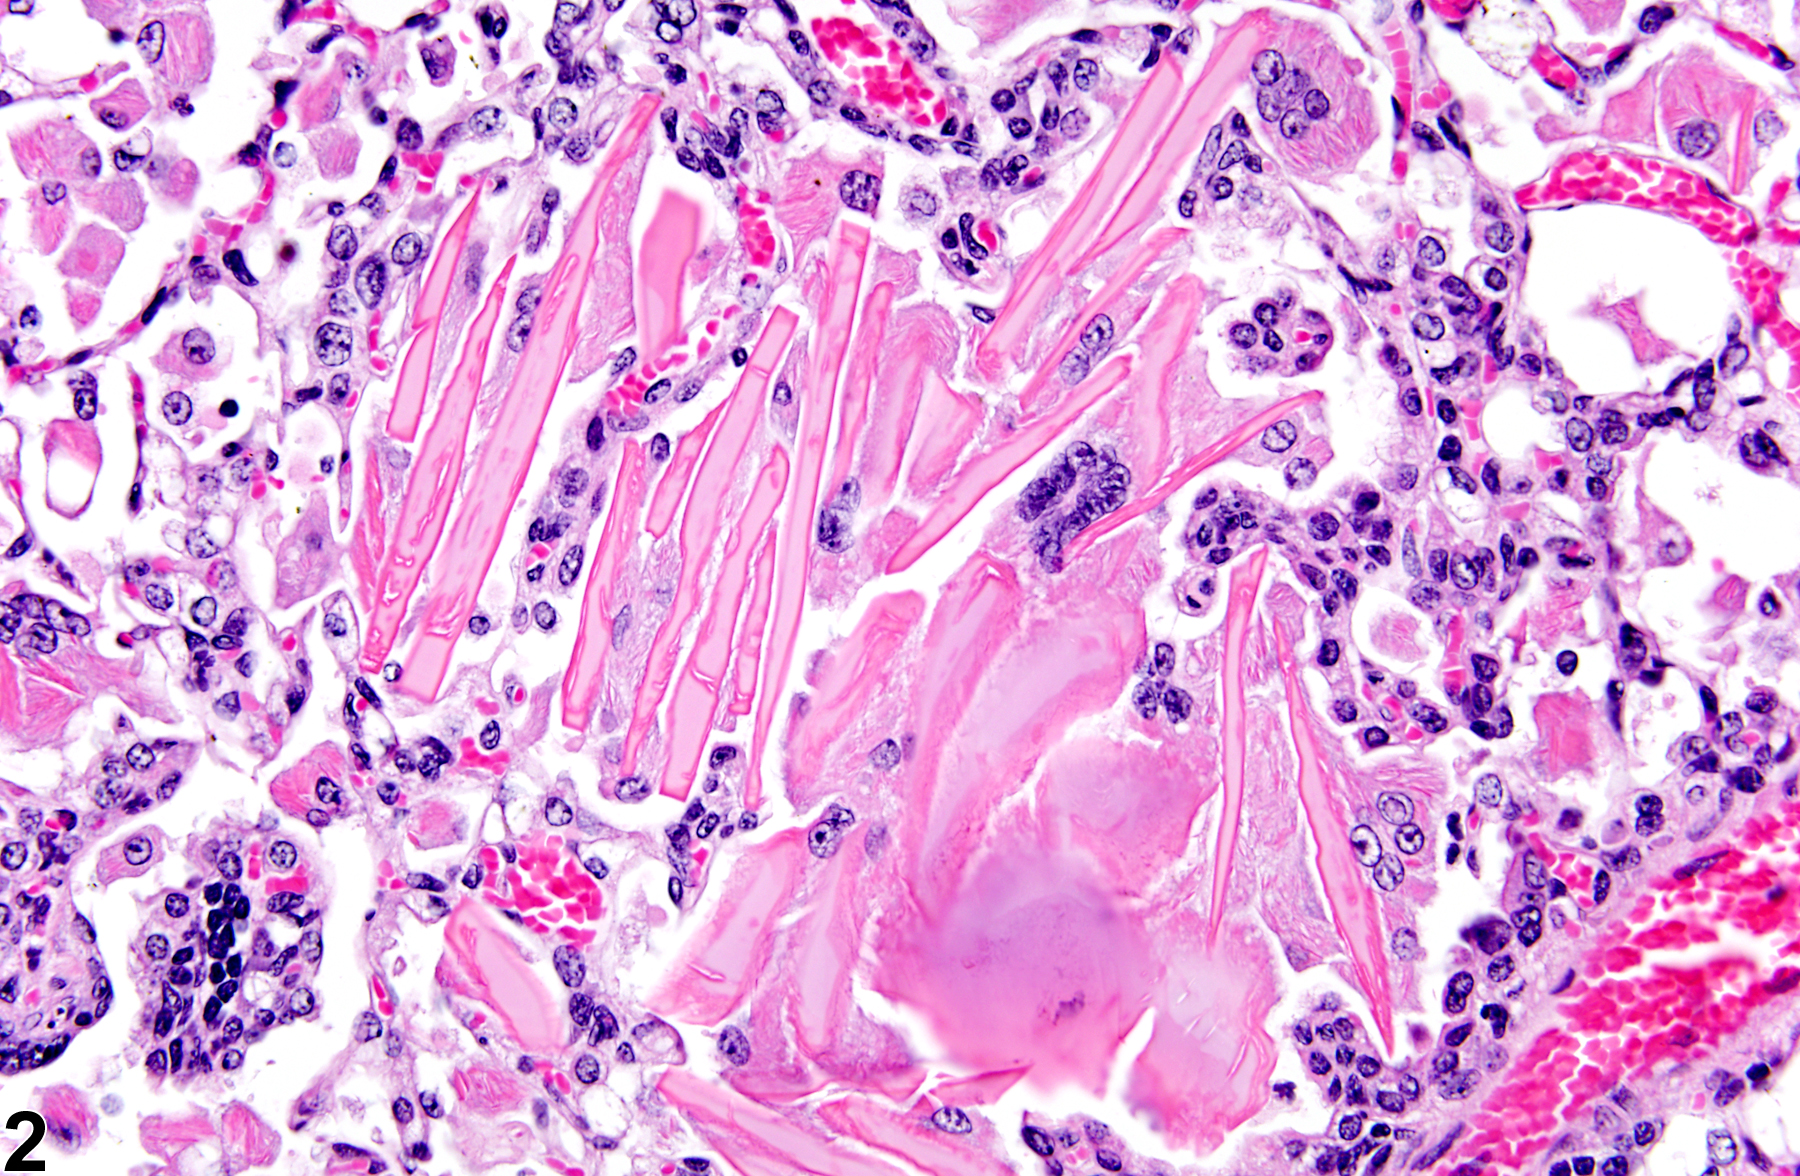 Image of crystals in the lung from a male B6C3F1/N mouse in a chronic study